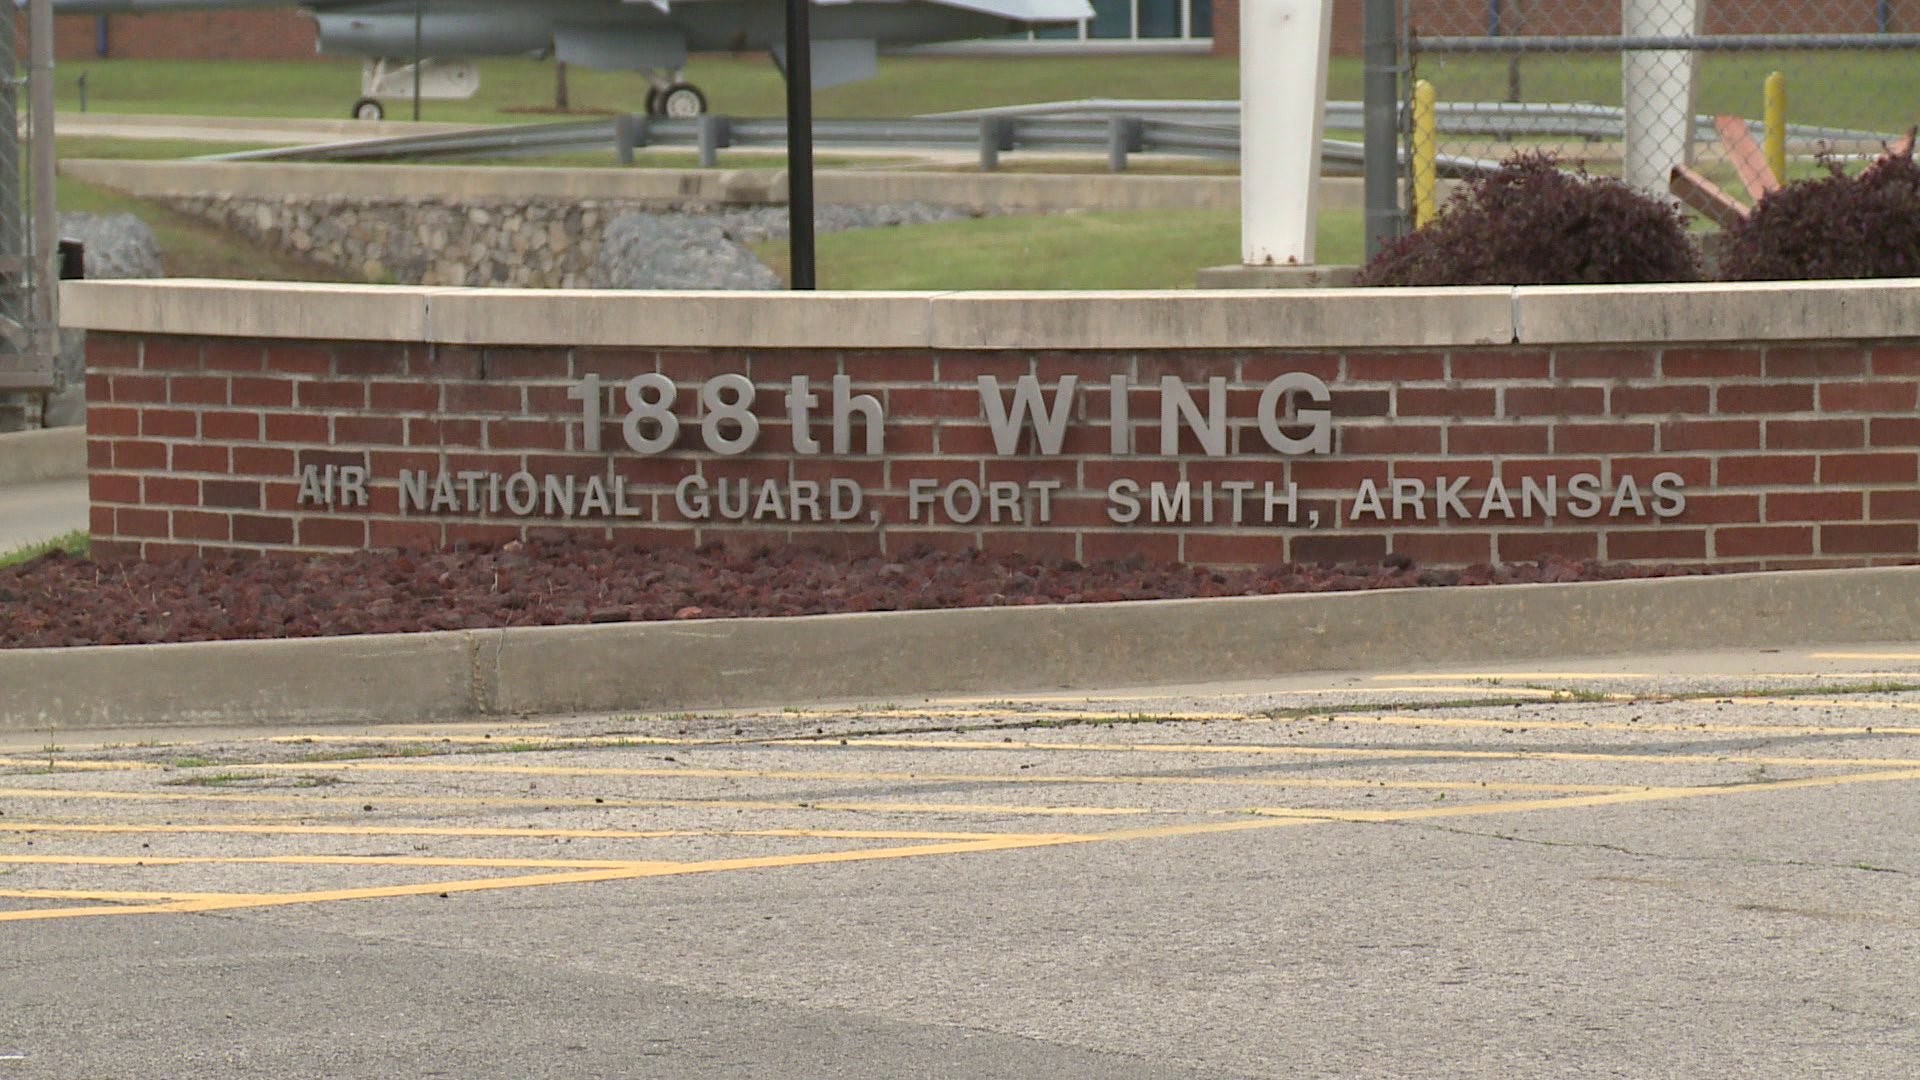 A public hearing regarding the environmental impact and the construction of a new military training center in Fort Smith will be held on Sept. 21, 2022.